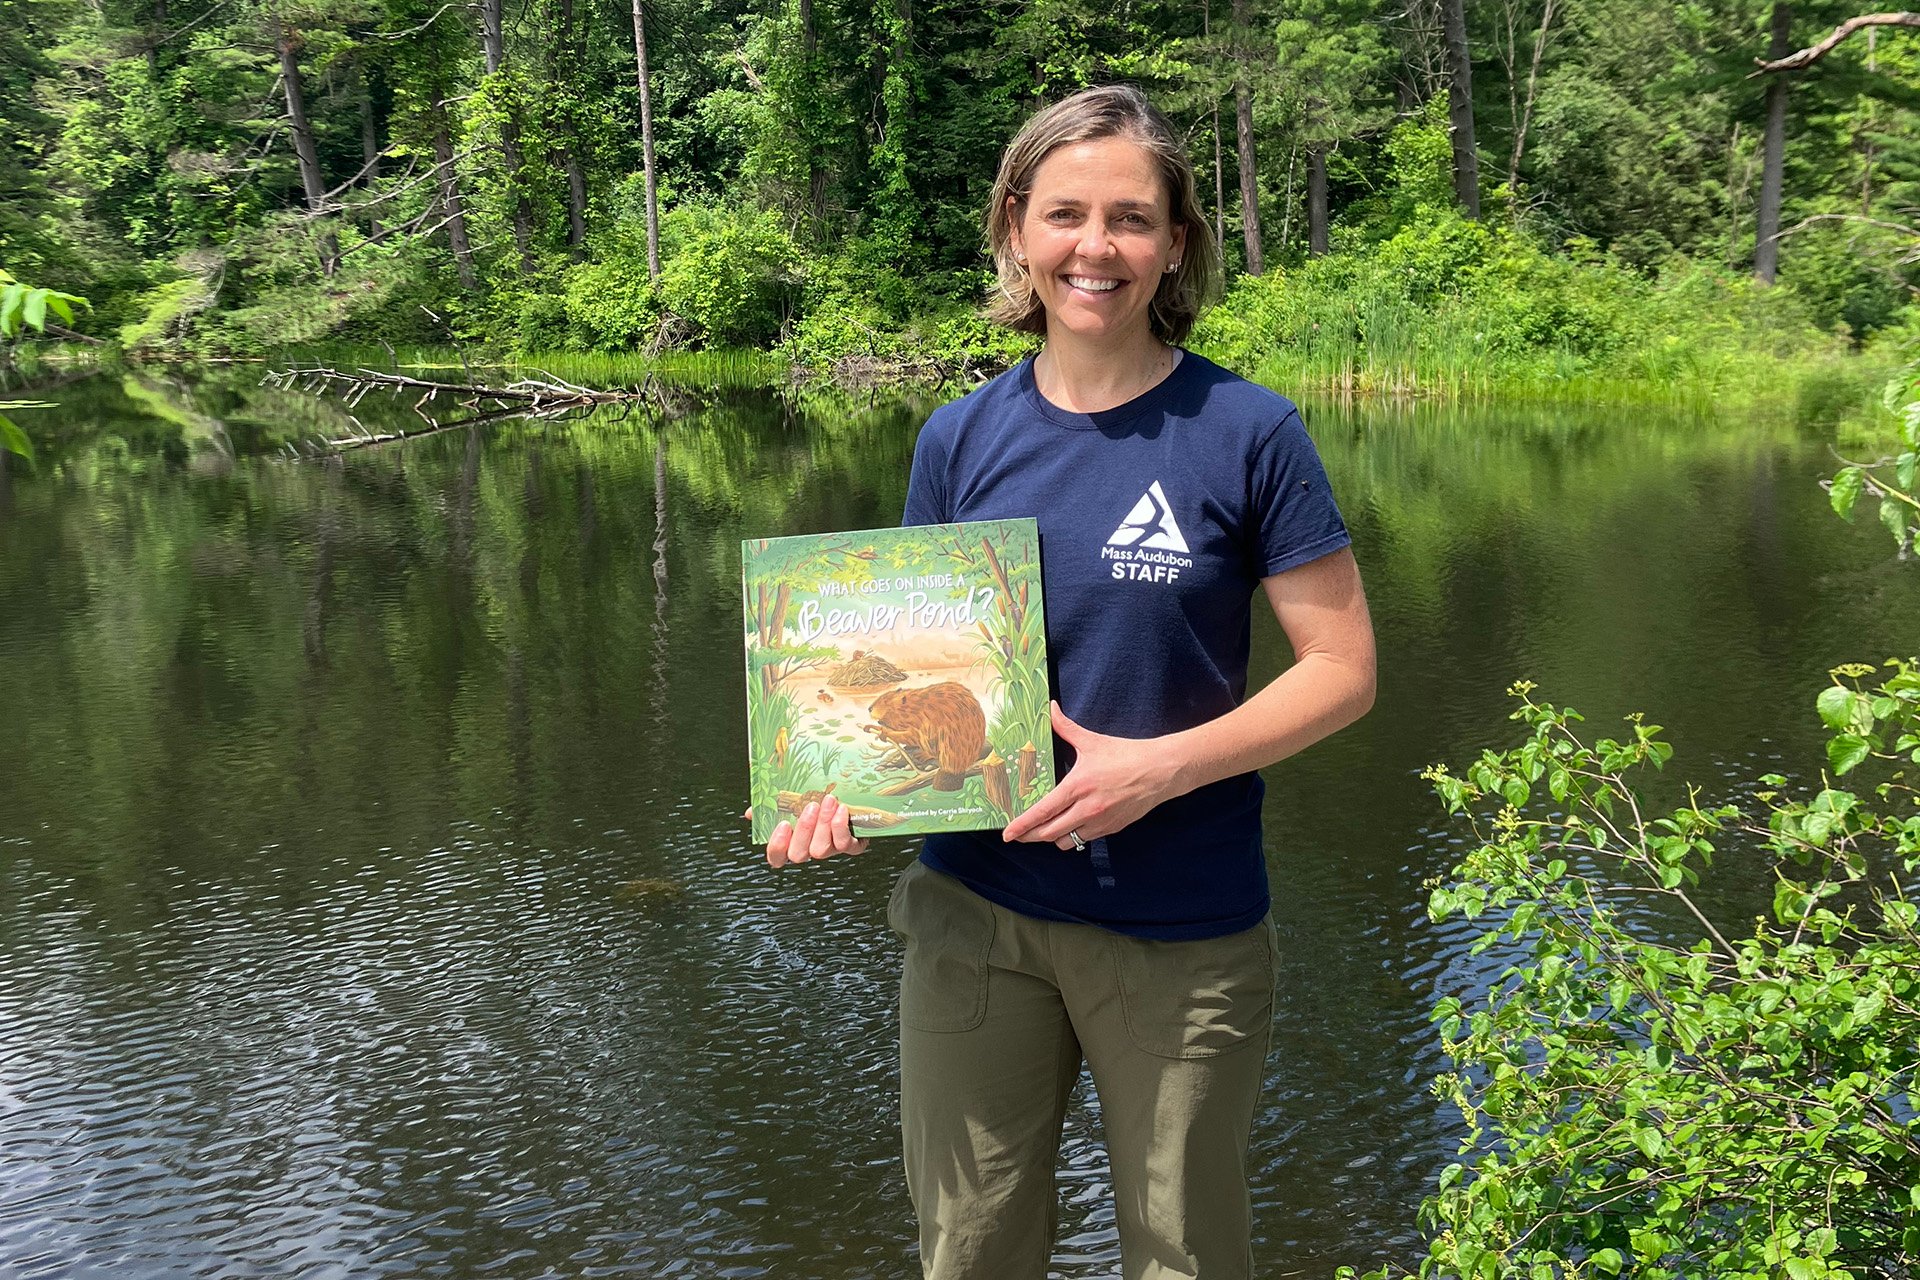 Becky Cushing Gop holding her book, posed for a photo in front of a pond